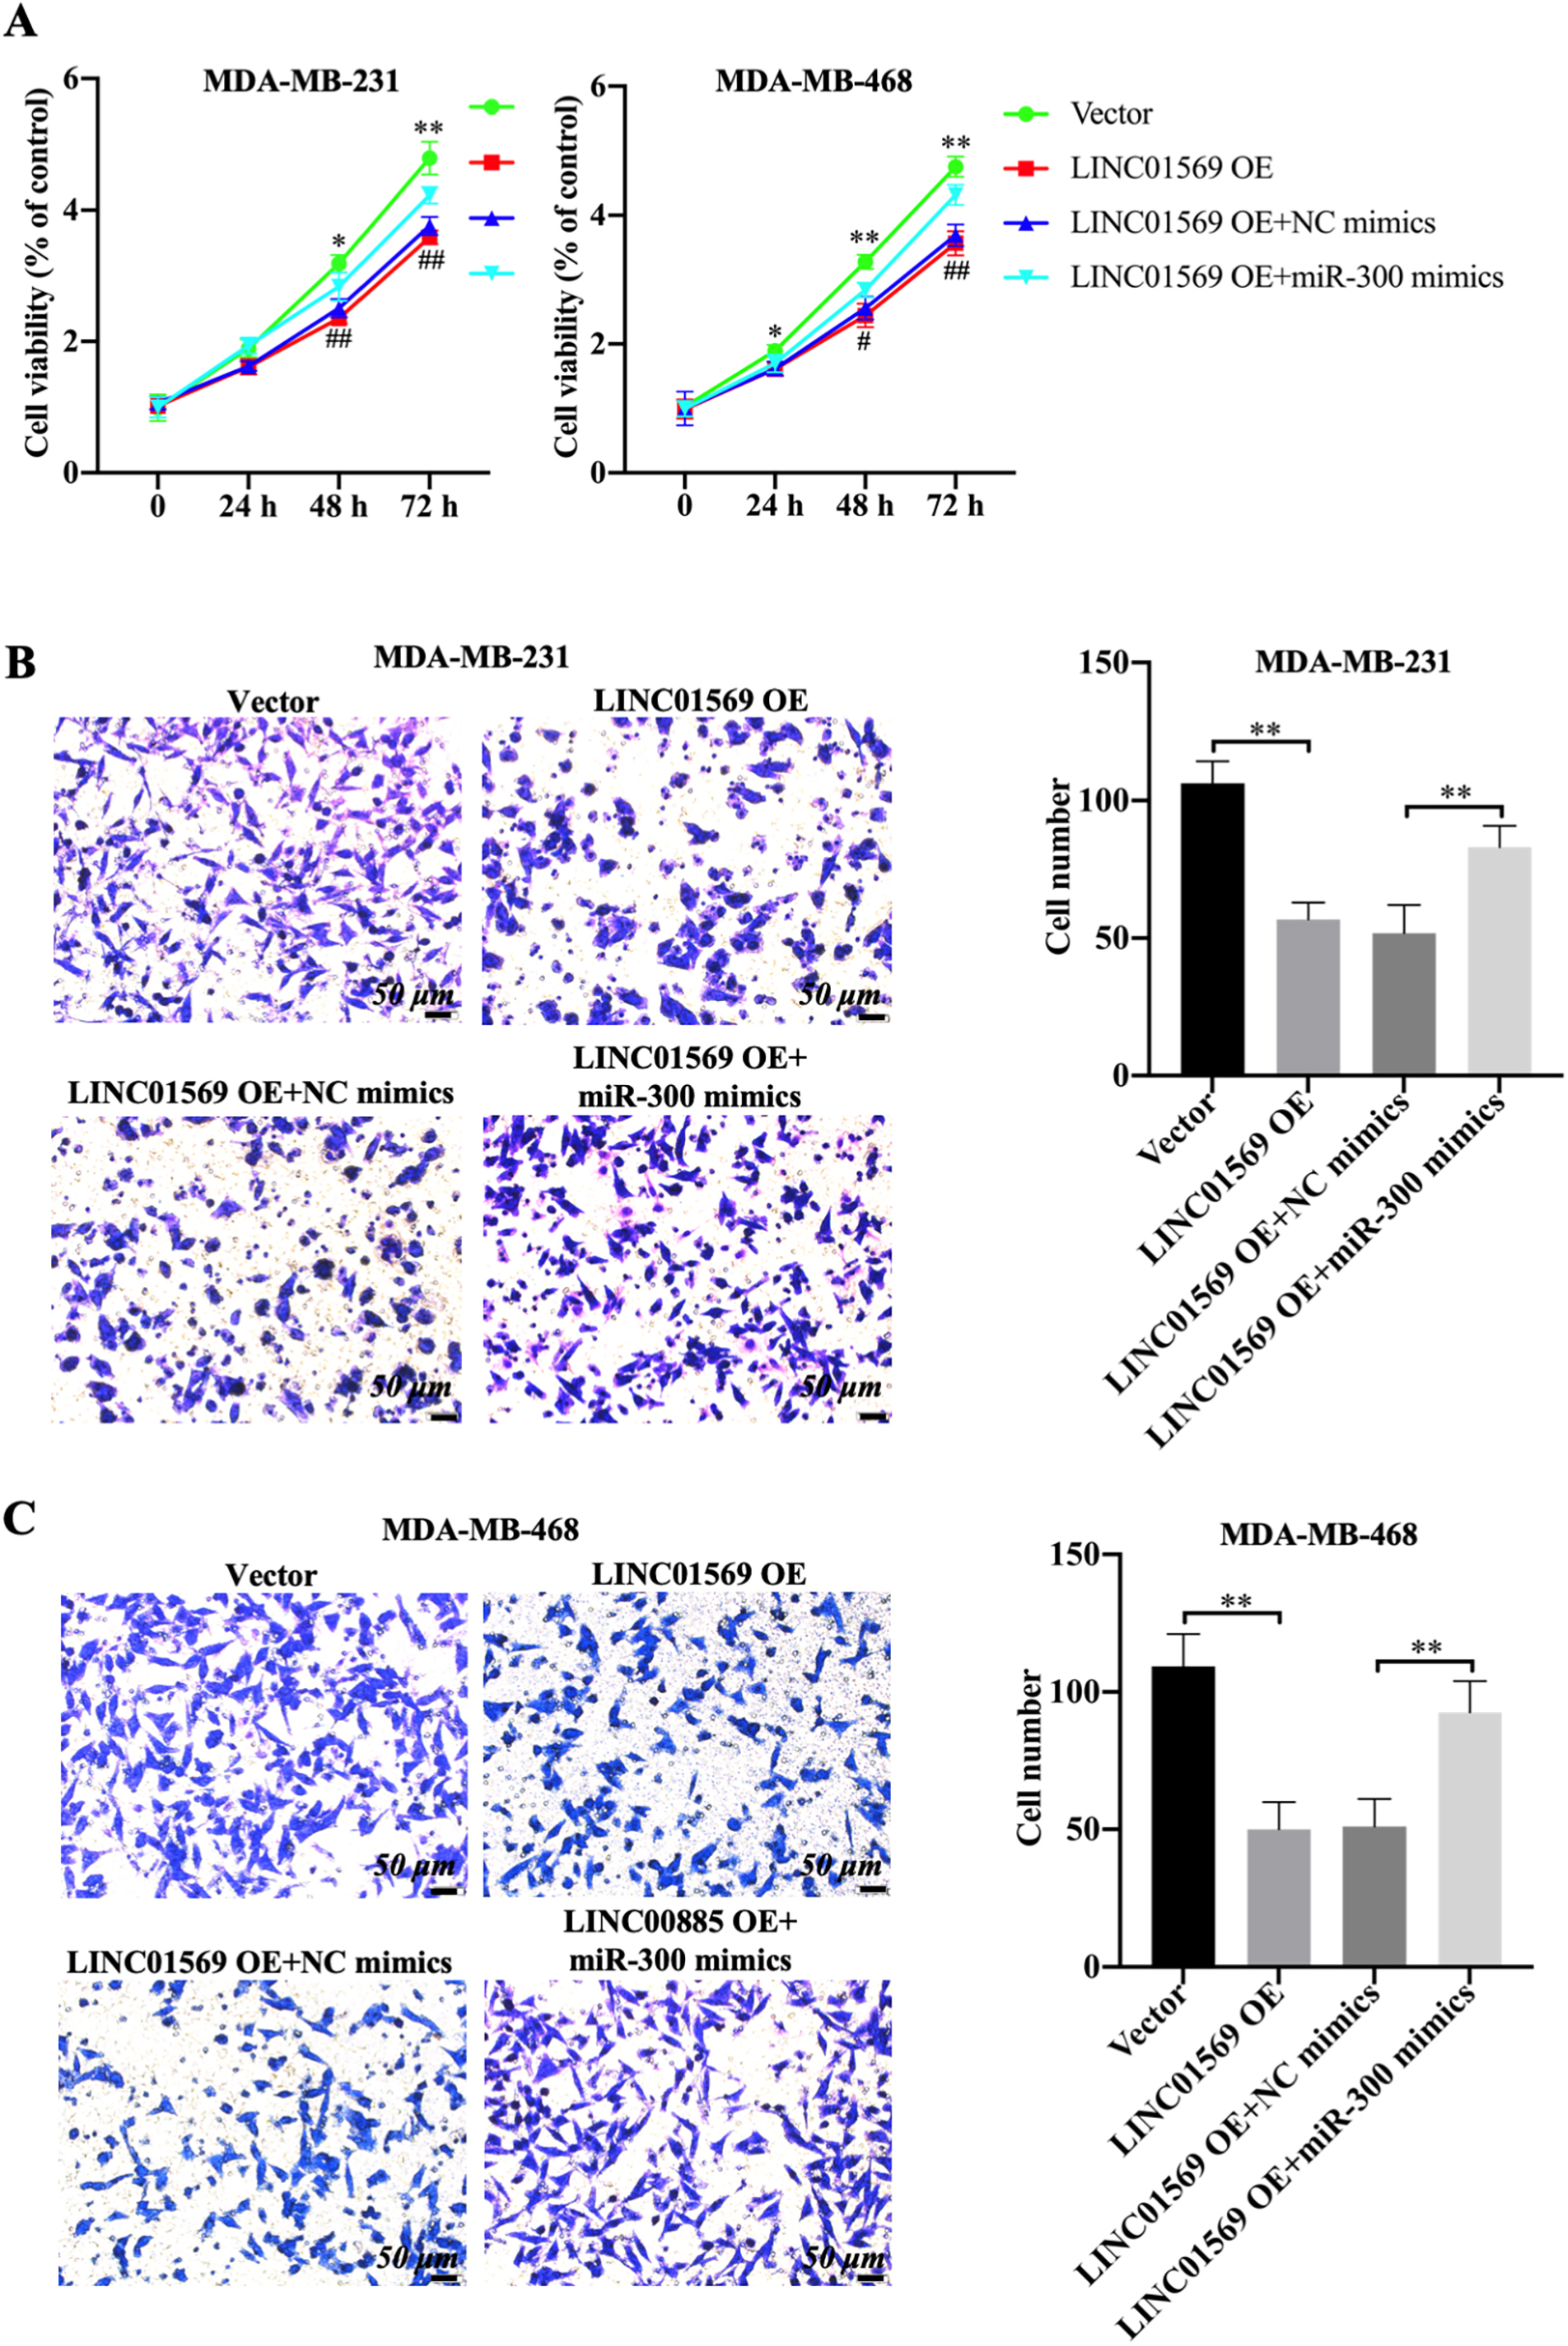 Effect of miR-300 on the migration of TNBC cells mediated by LINC01569 overexpression. MDA-MB-231 and MDA-MB-468 cells were transfected with vector, LINC01569 OE or LINC01569 OE plus NC mimics, LINC01569 OE plus miR-300 mimics. (A) After transfection, cell viability was determined using CCK8 assay at 0, 24, 48, and 72 h. (B–C) Transwell assay was used to determine the migration ability of MDA-MB-231 (B) and MDA-MB-468 (C) cells. Relative quantitative analysis of migrating cells, as illustrated in the right panel. Scale: 50 μm.